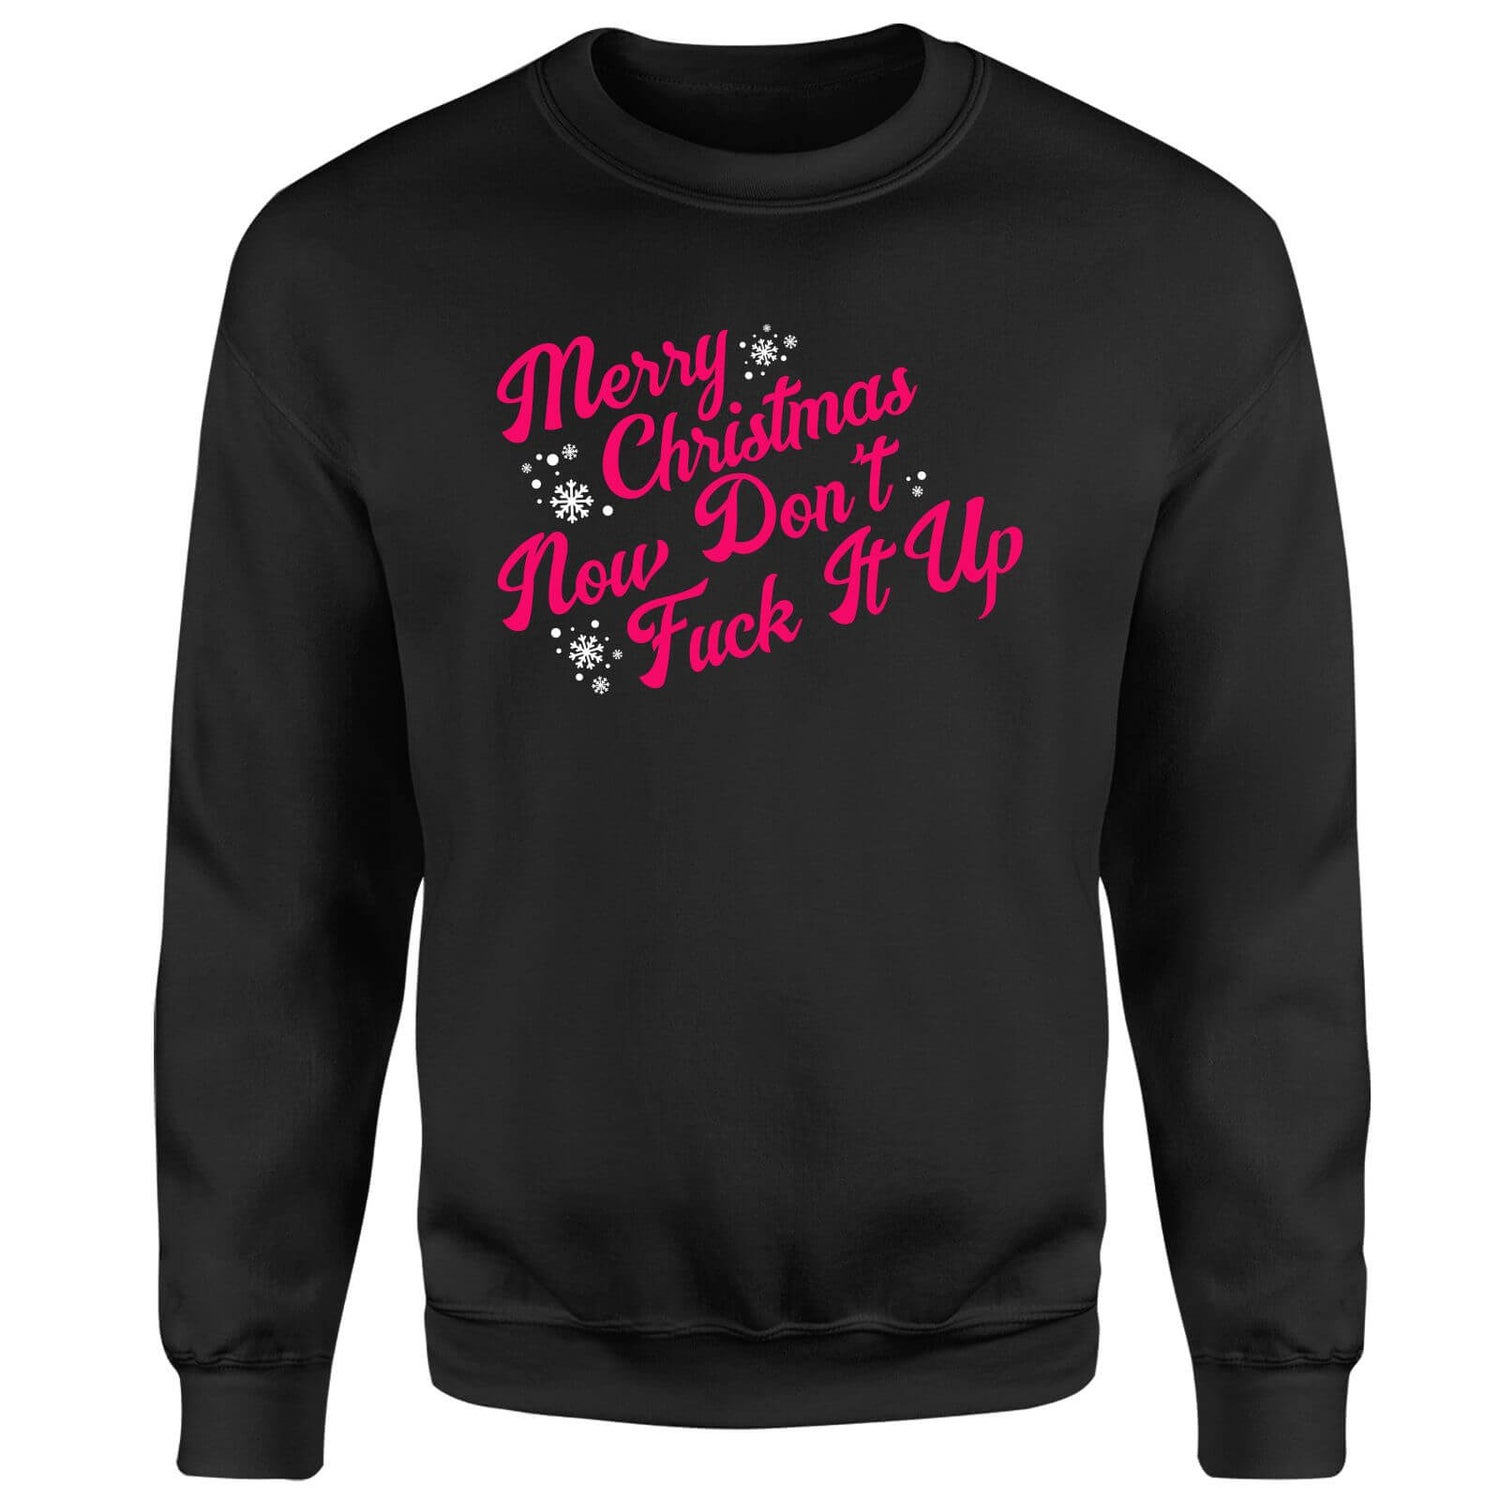 Merry Drag Christmas Now Don't Fuck It Up Unisex Christmas Jumper - Black